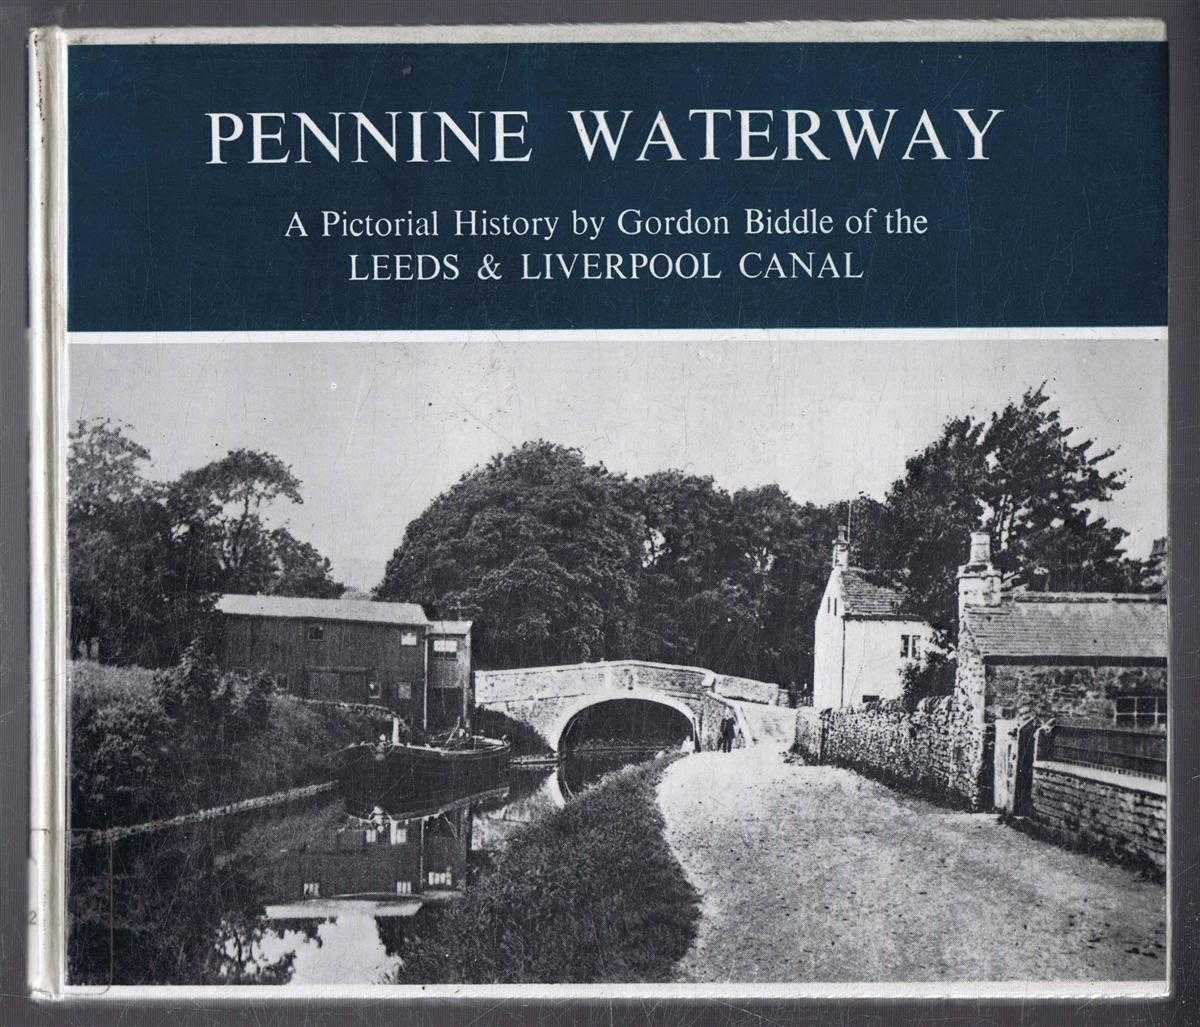 Gordon Biddle - Pennine Waterway, A Pictorial History of the Leeds & Liverpool Canal